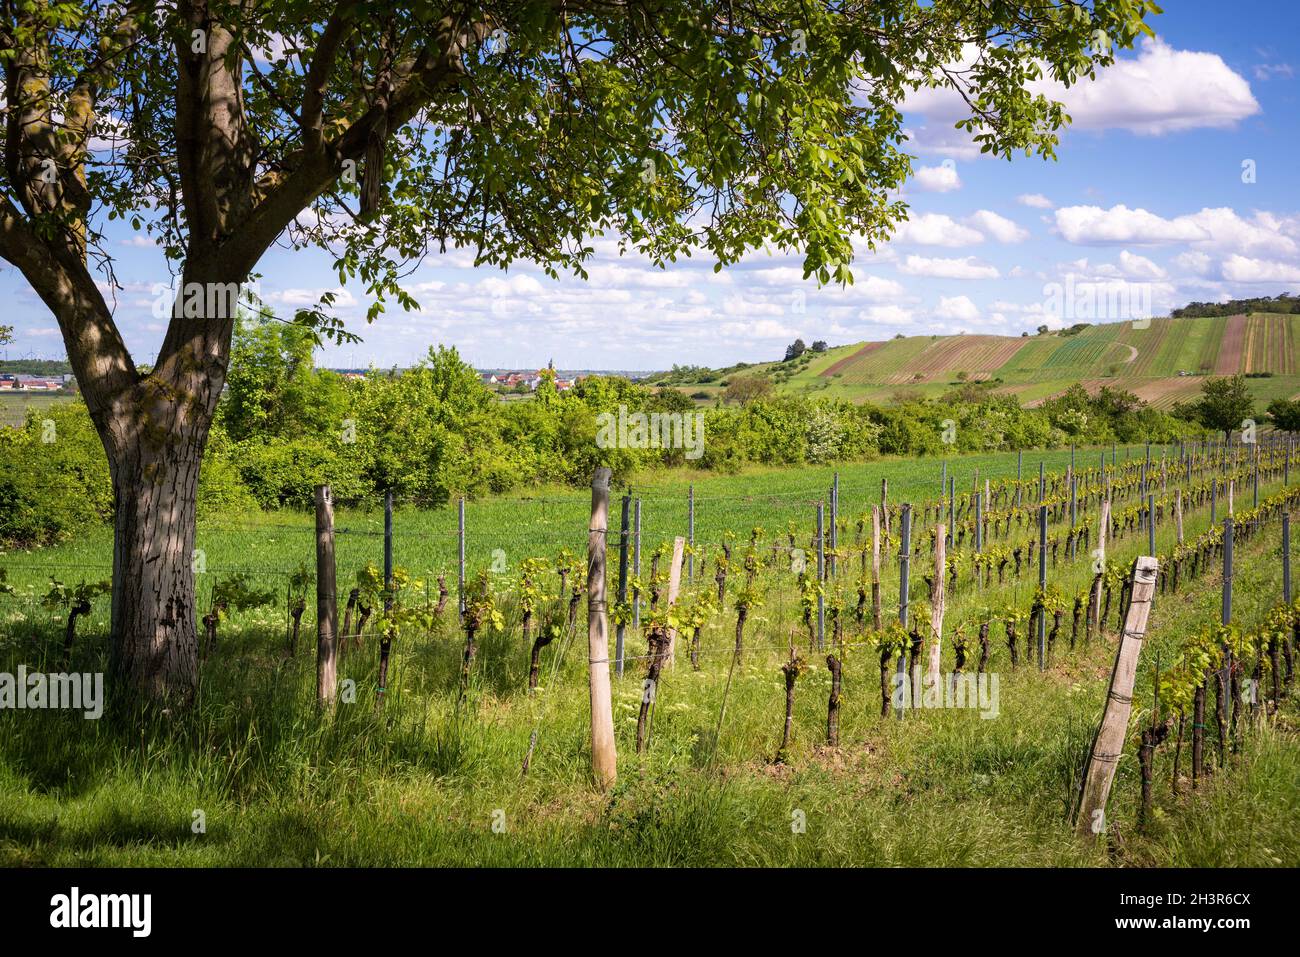 Vineyards near Jois in Burgenland on a sunny day in spring Stock Photo